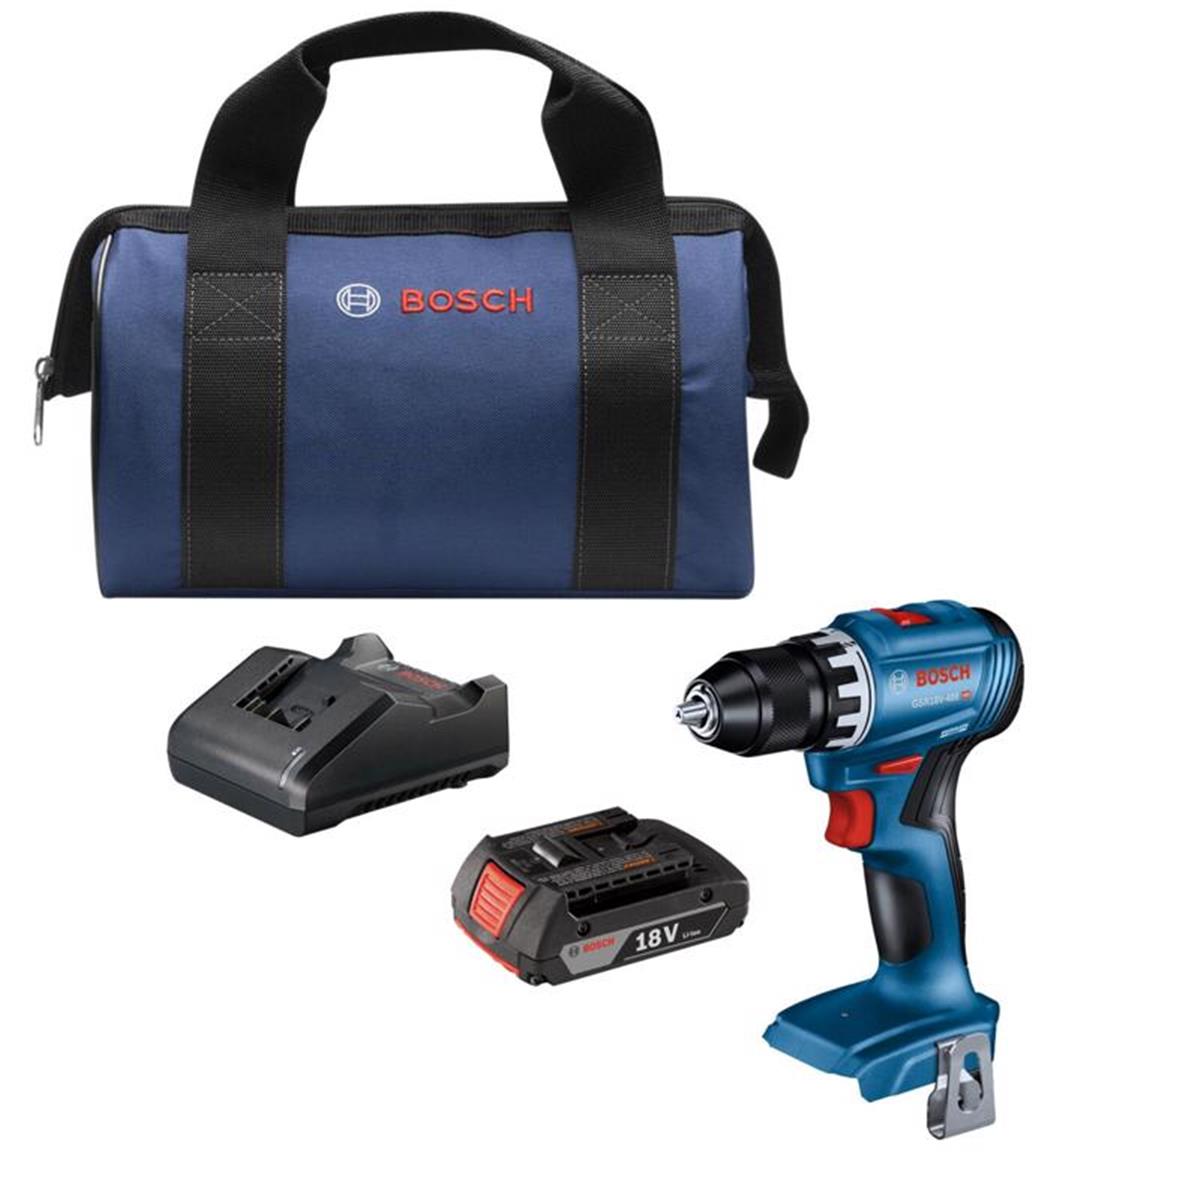 Picture of Bosch 2026701 0.5 in. 18V Brushless Cordless Hammer Drill & Drive Kit - Battery & Charger